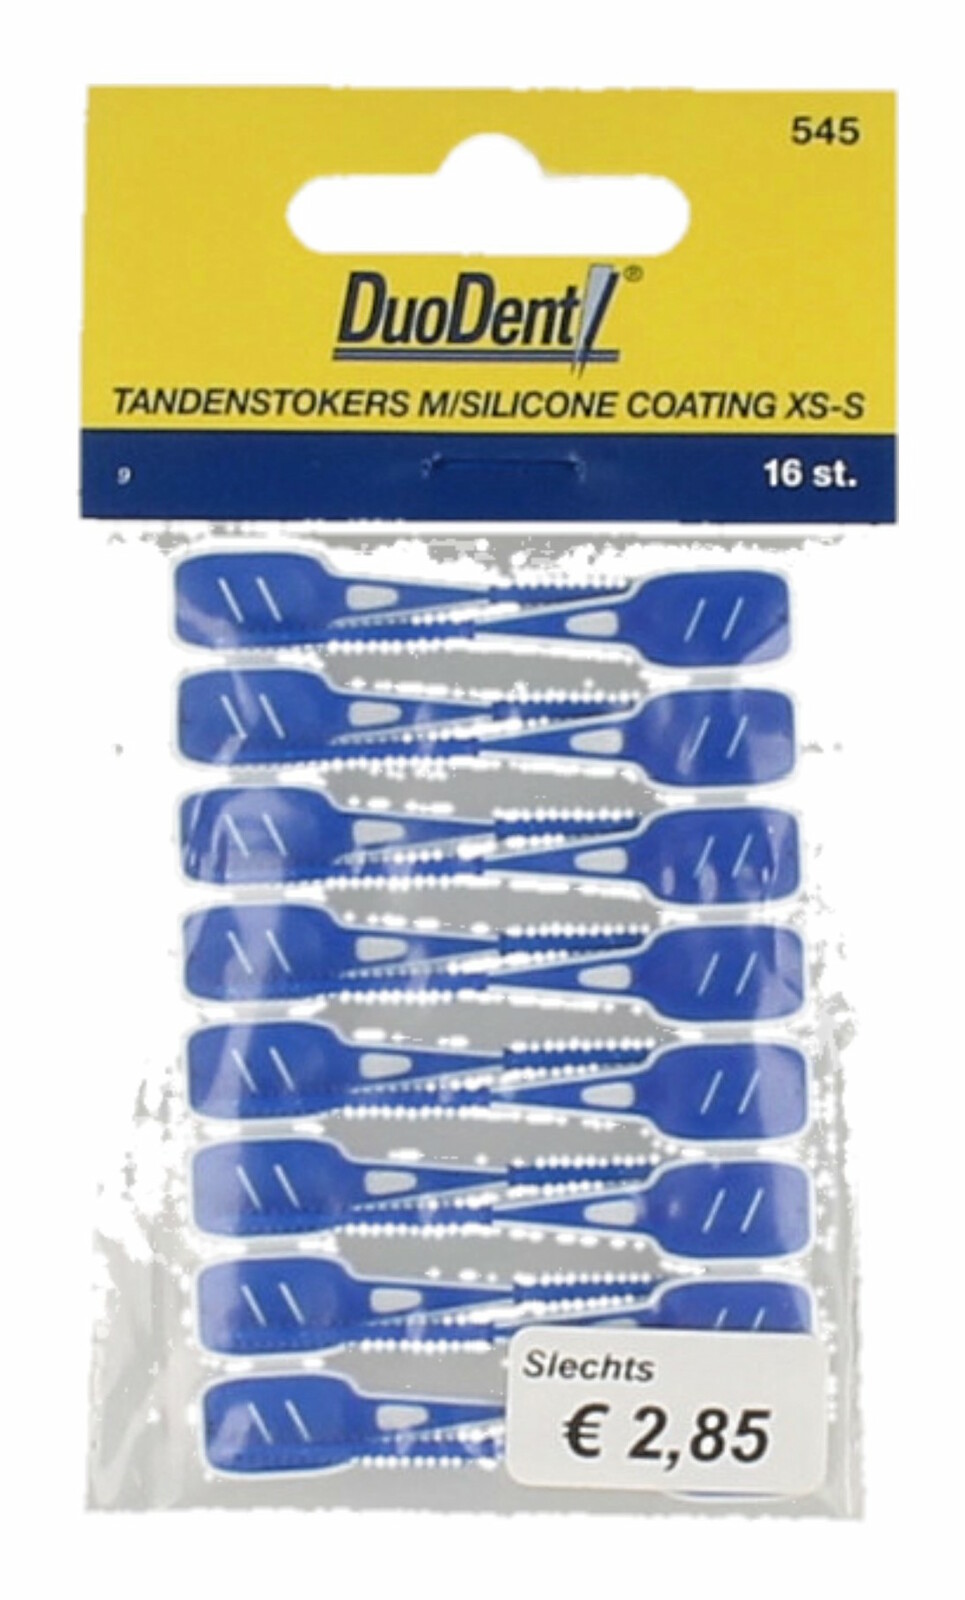 Duodent Tandenstokers Silicone Coating XS-S